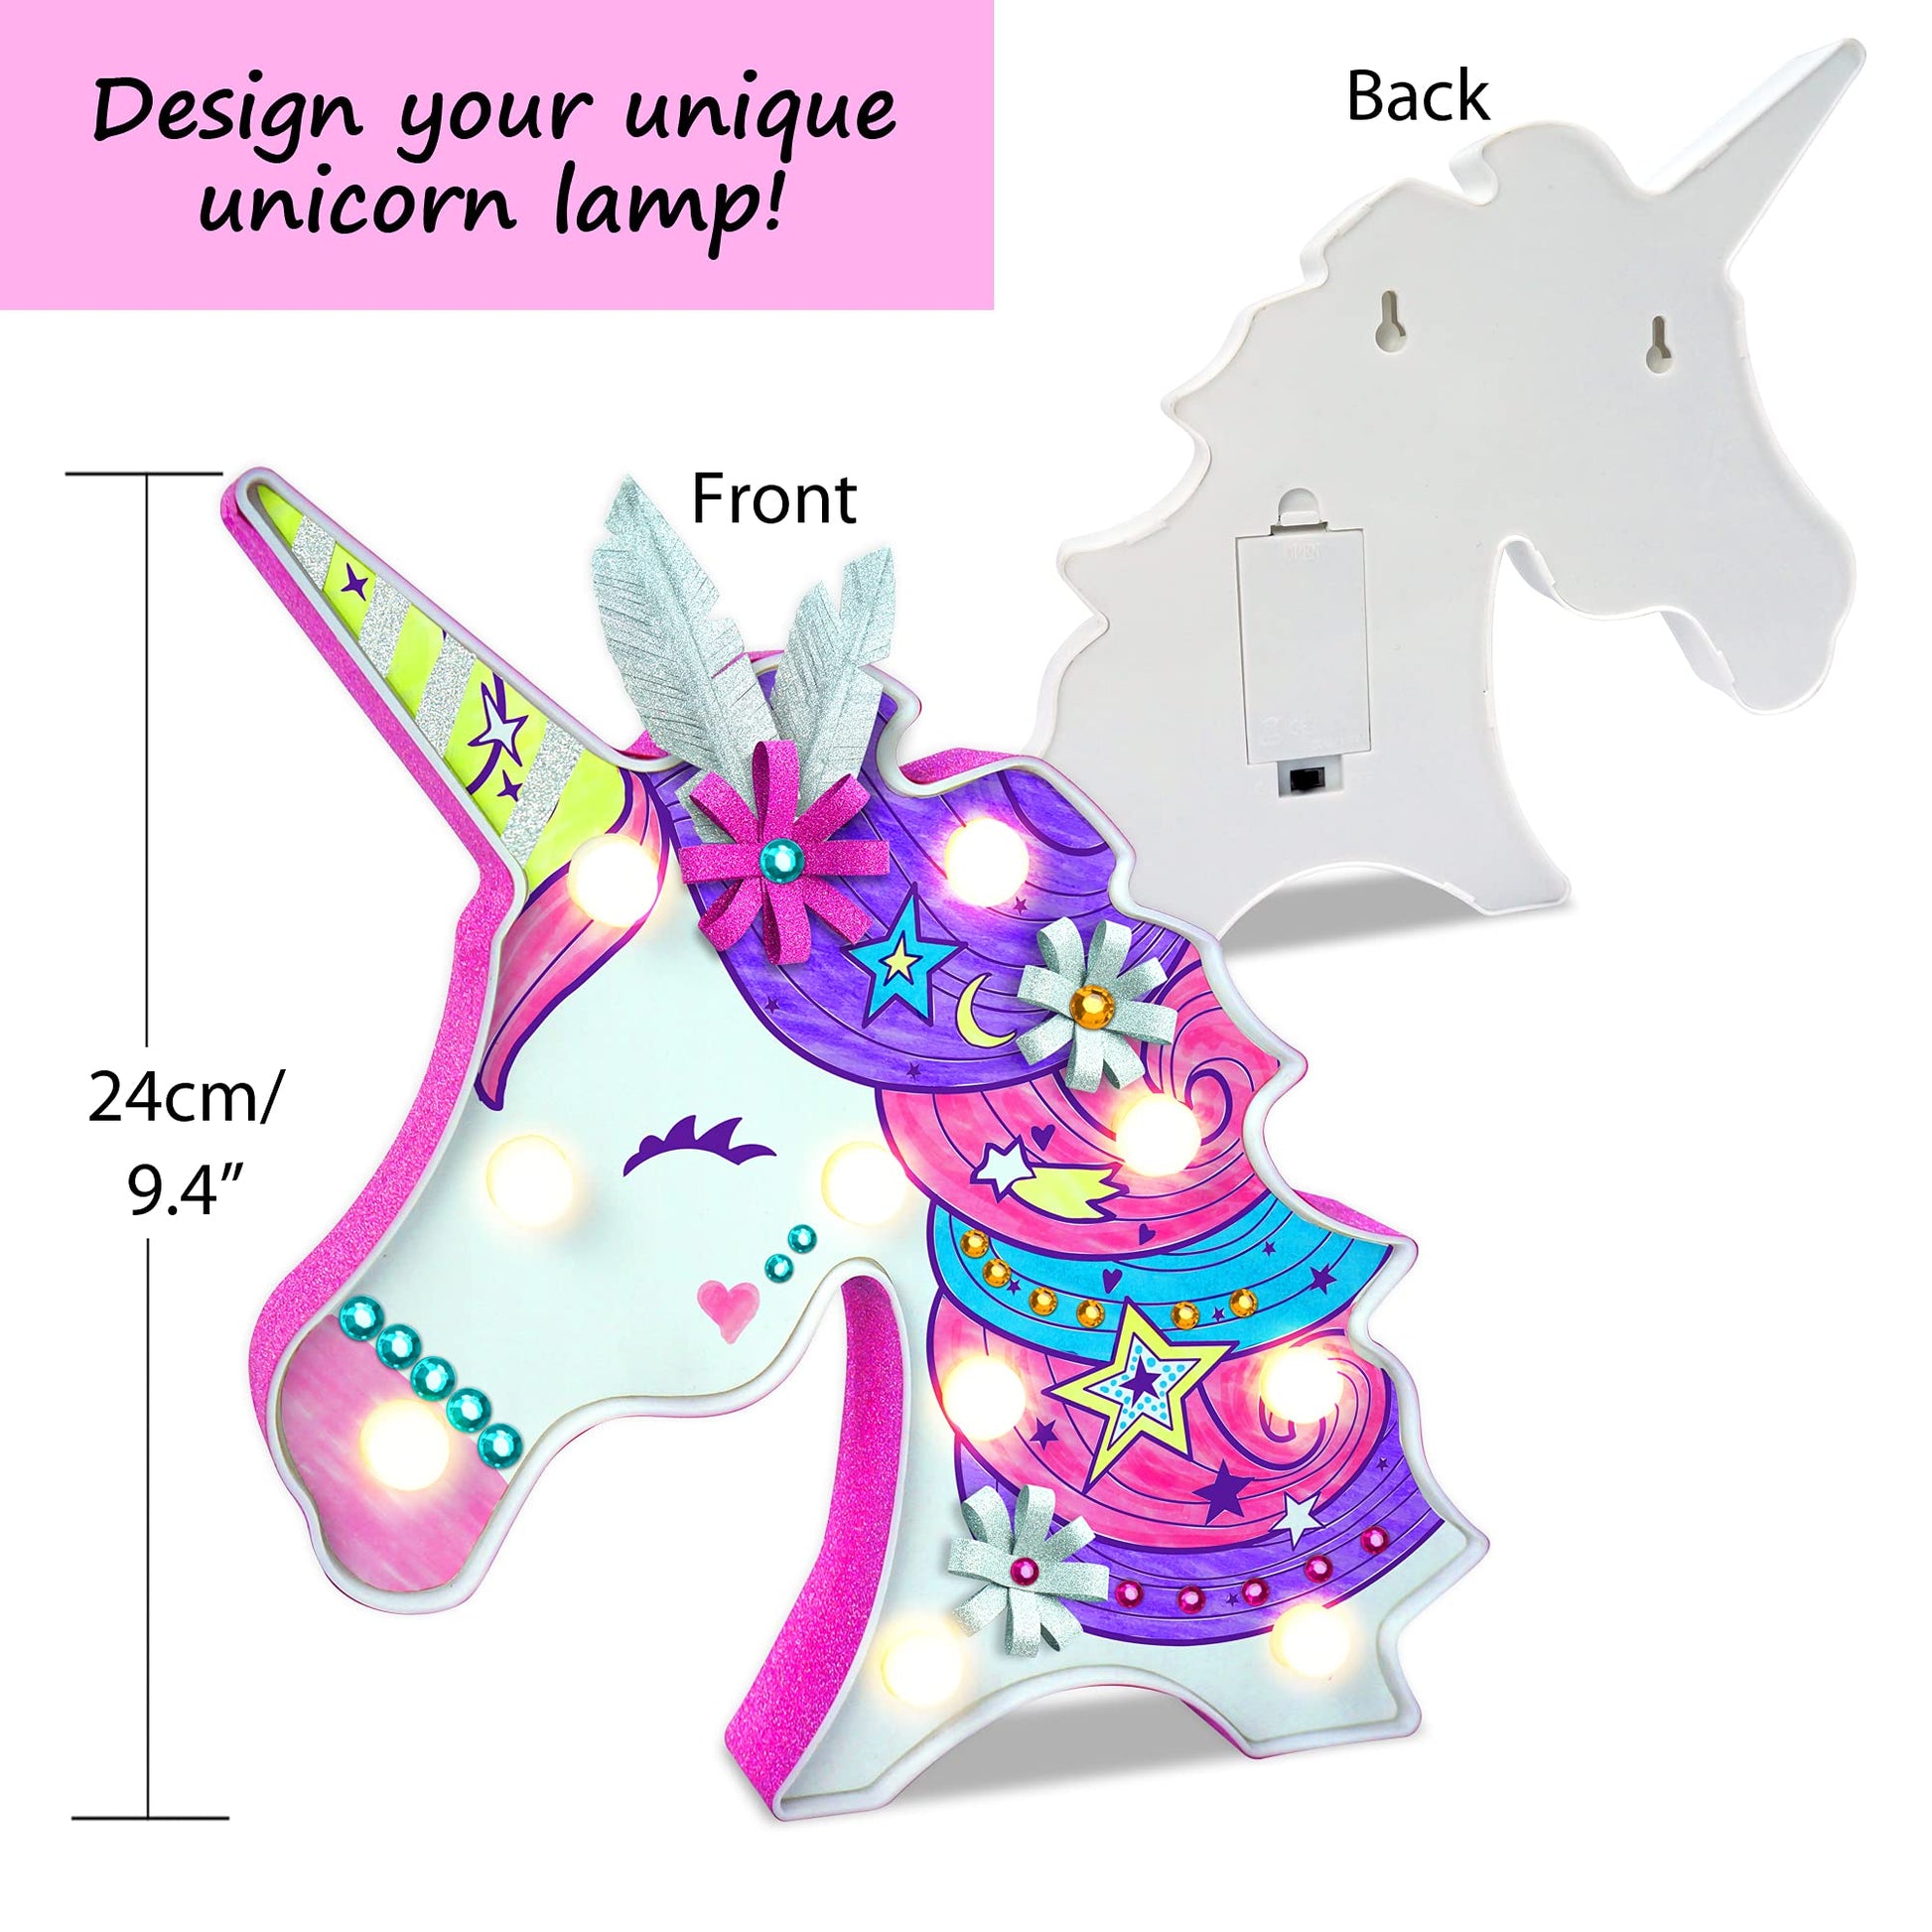 KRAFUN My First Unicorn Art & Craft Kit for Young Kids Beginner, Includes 6 Animal Projects, Instructions & Felt, Paper Material